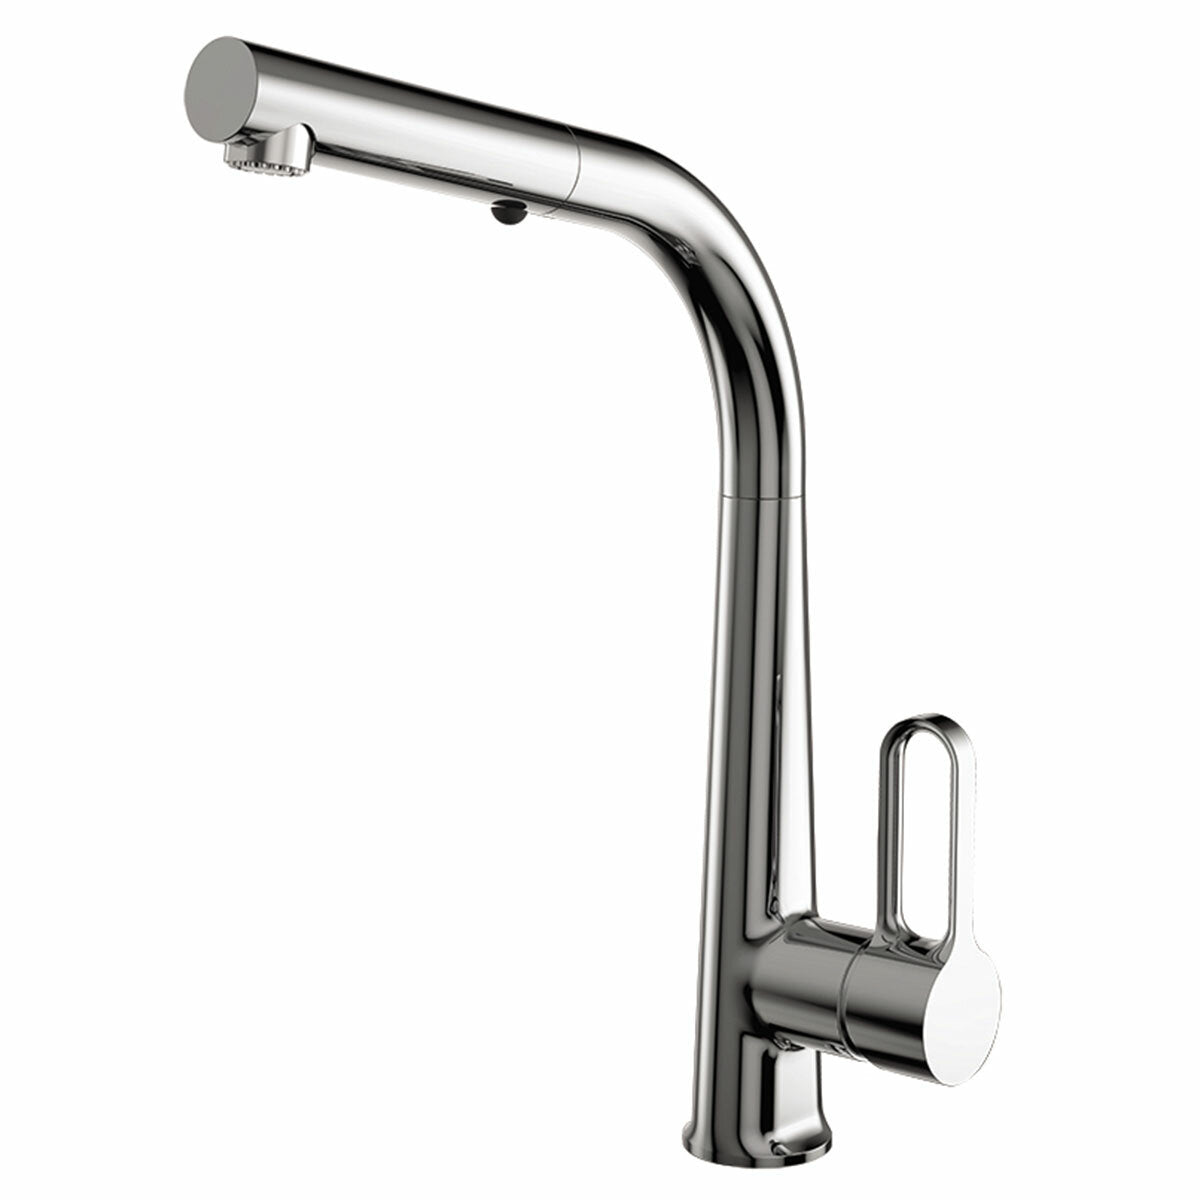 Fima Carlo Frattini Skinny Series Single-hole sink mixer with pull-out two-jet brass shower and water-saving cartridge